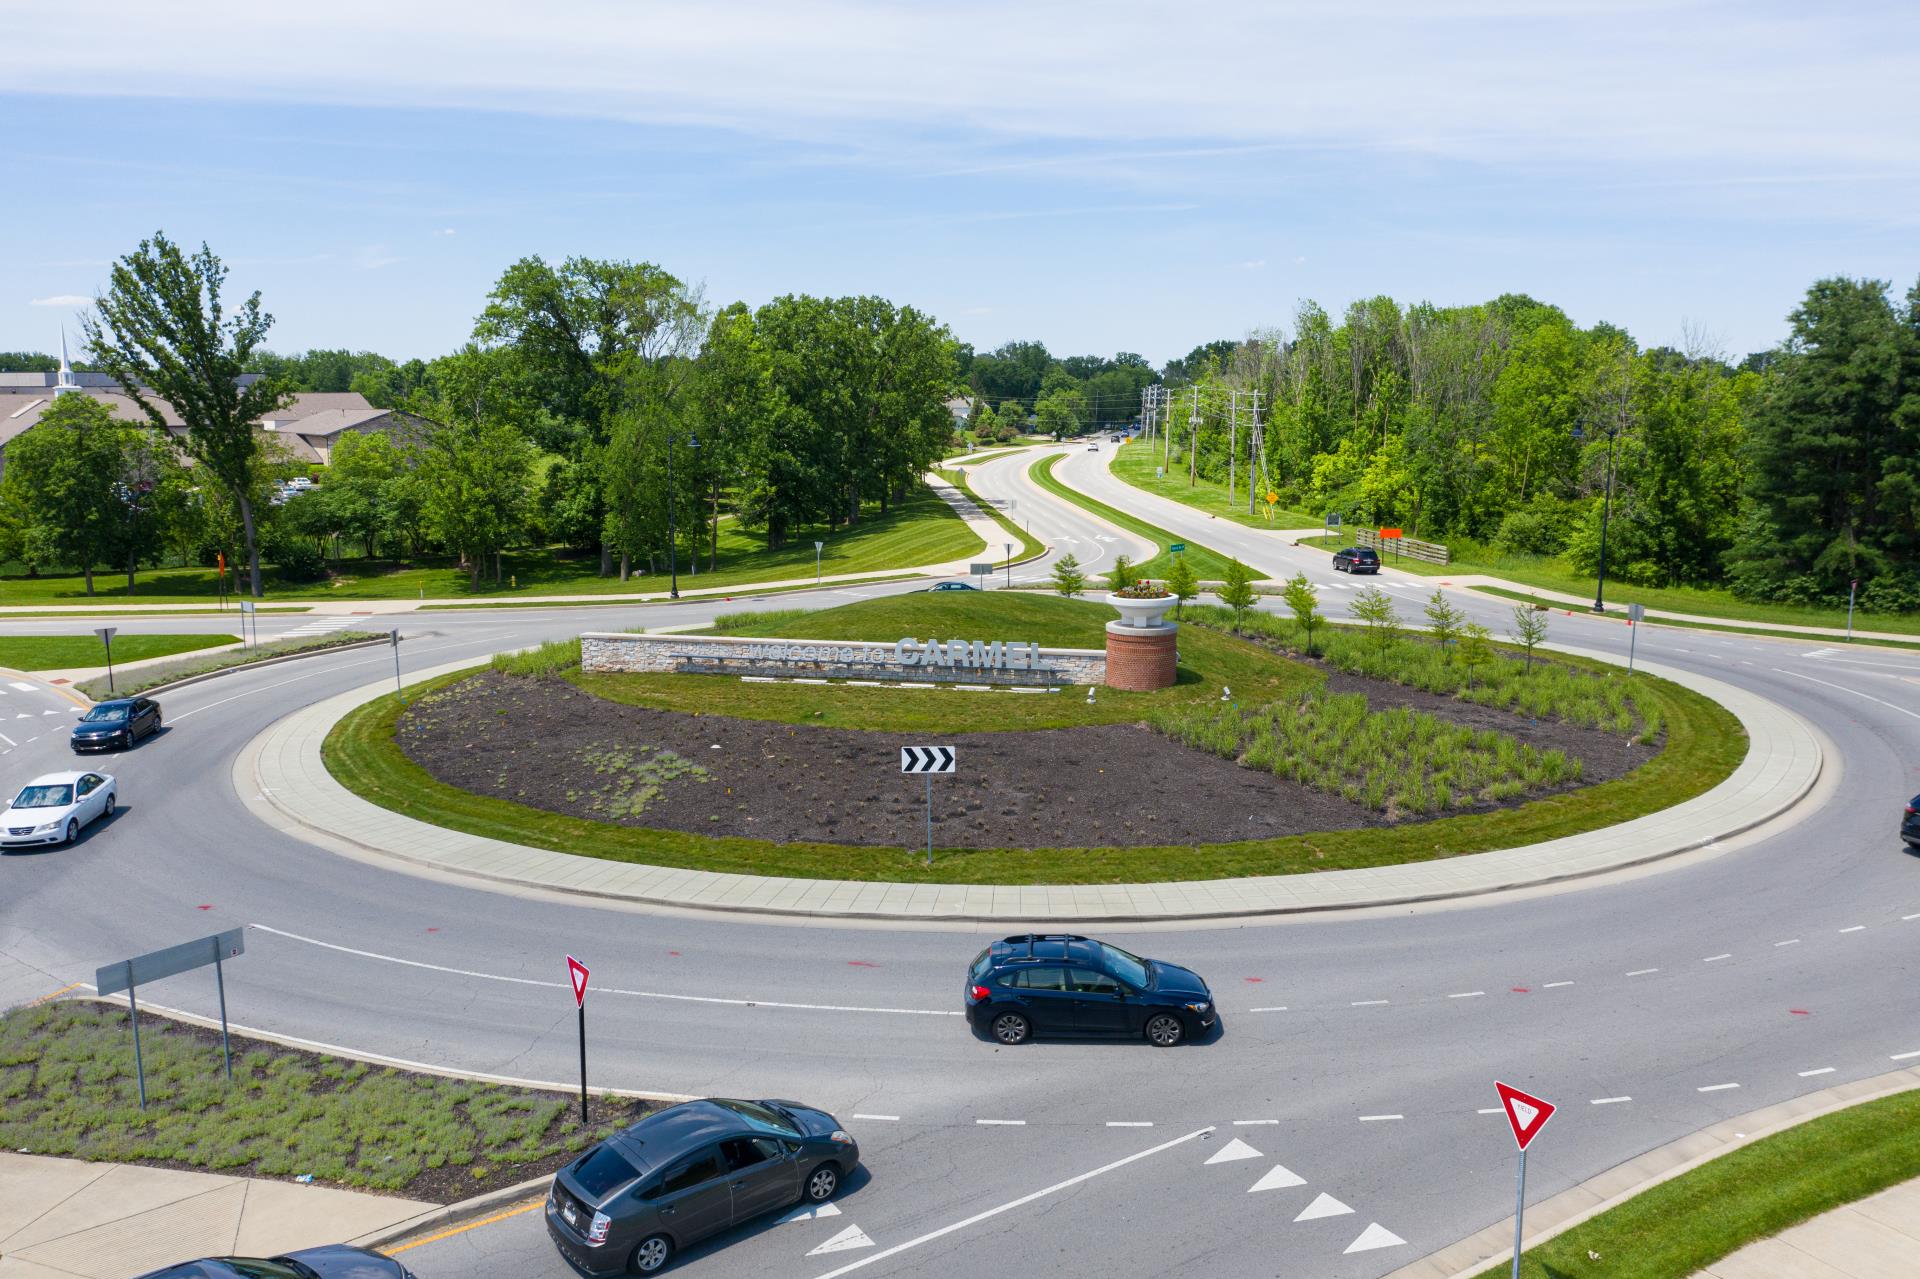 Today I Learned - TIL when a city had replaced all their intersections with roundabouts, construction costs dropped $125,000, fuel savings reached 24k gallons/year per roundabout and injury accidents dropped 80%.